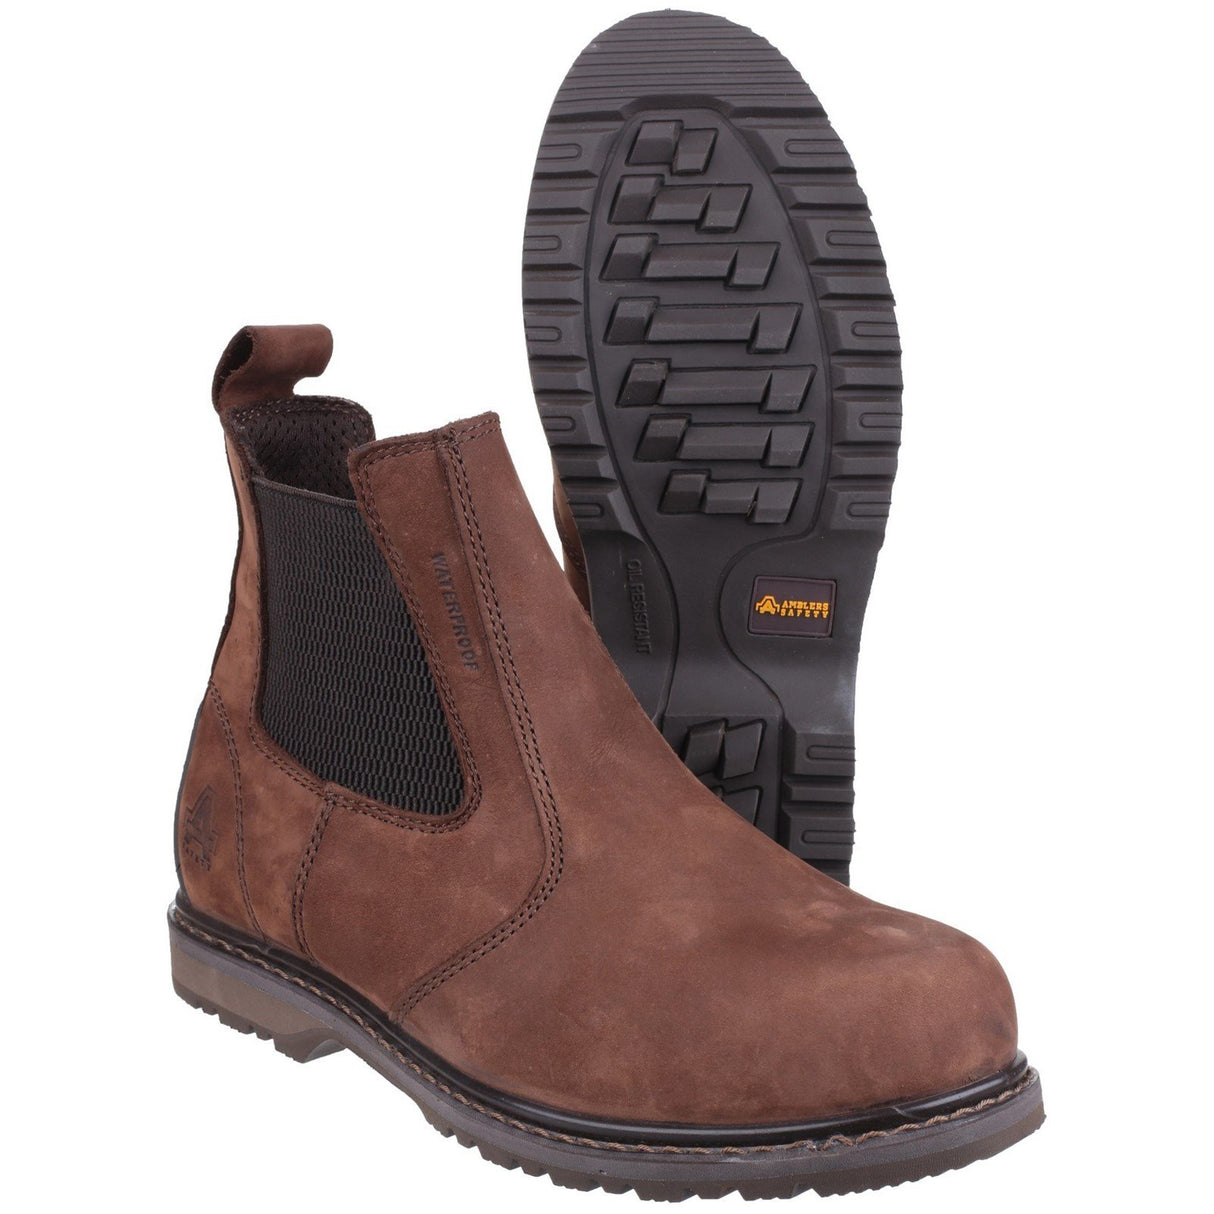 Amblers Sperrin Safety Boots